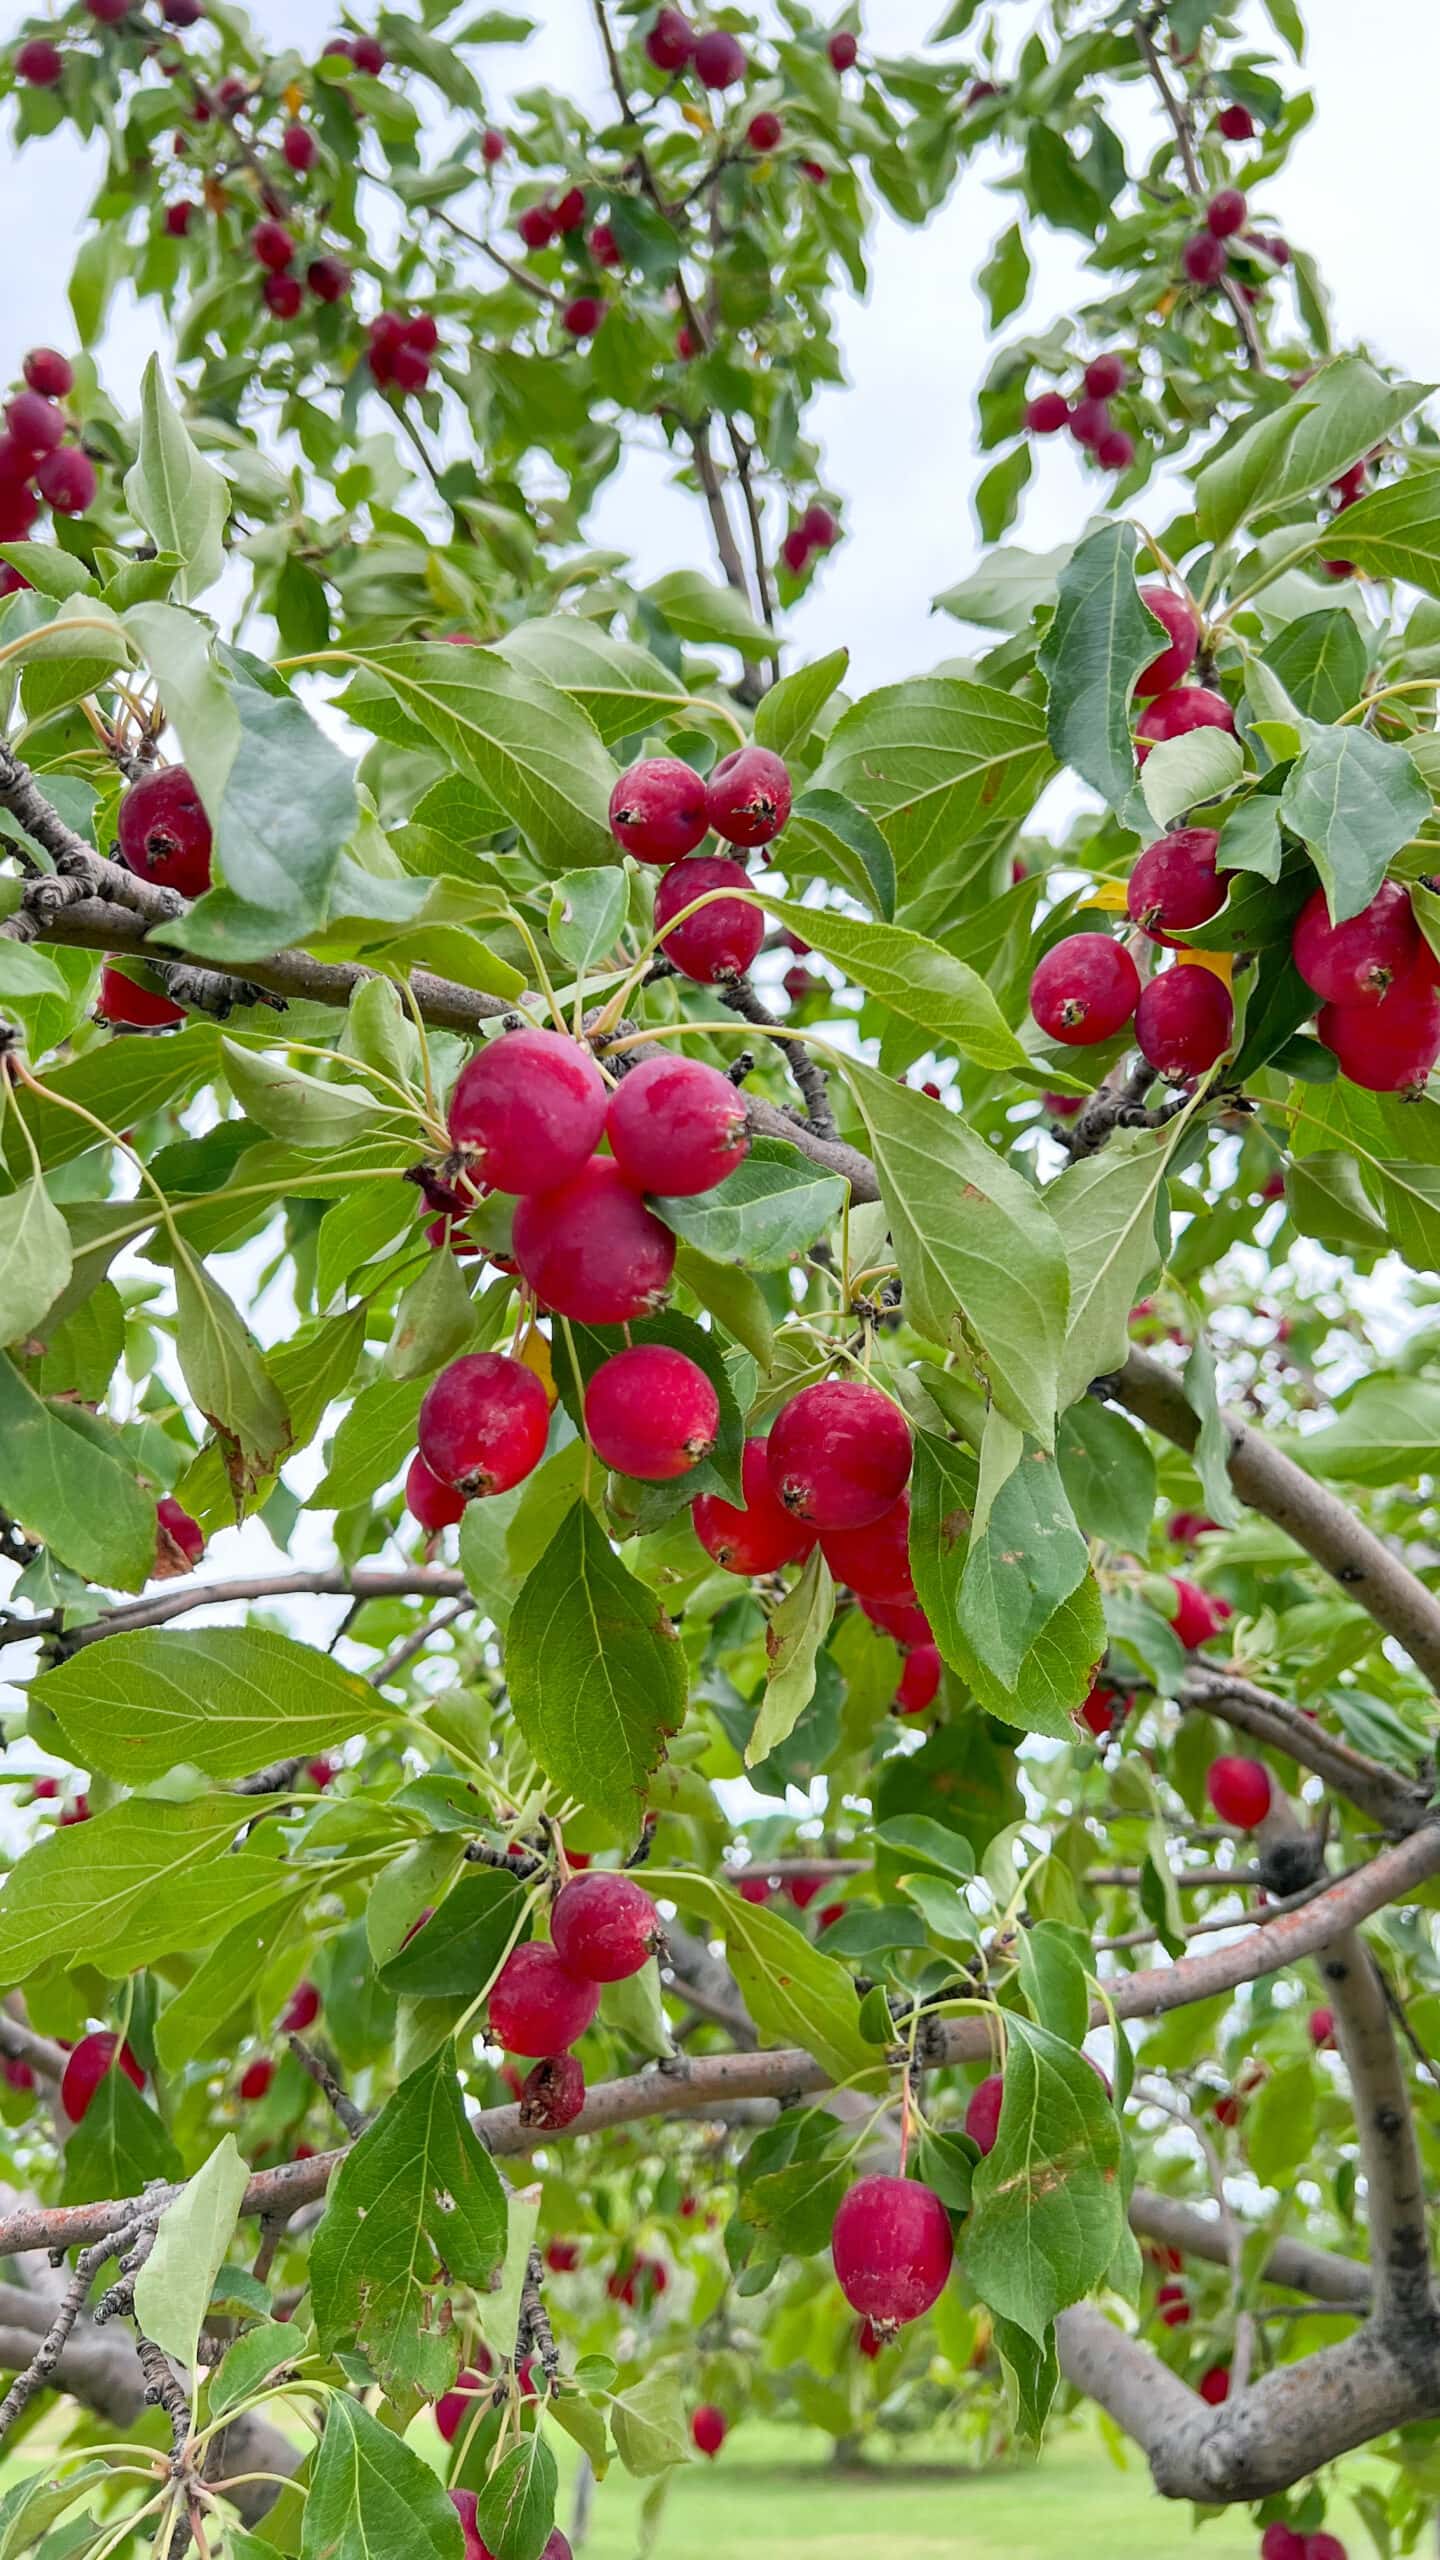 A dolgo crabapple tree with an abundance of red crabapples on it.